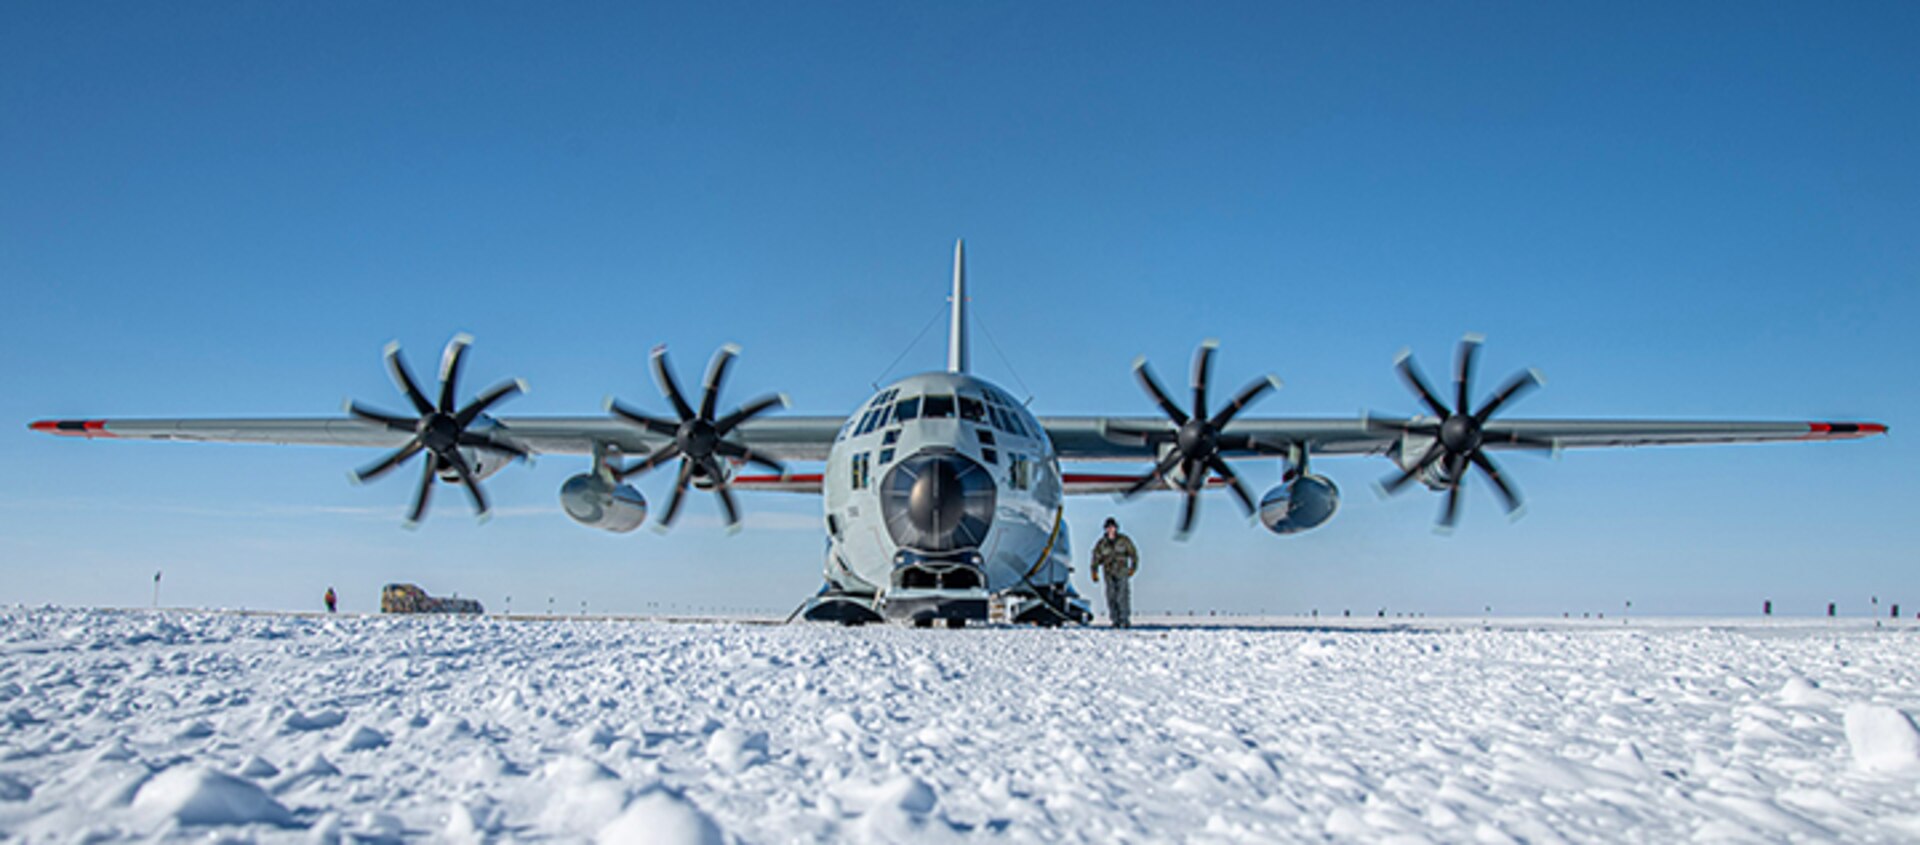 The 109th Airlift Wing supported the 34th season of Operation Deep Freeze at McMurdo Station, Antarctica, from October 2021 through February 2022